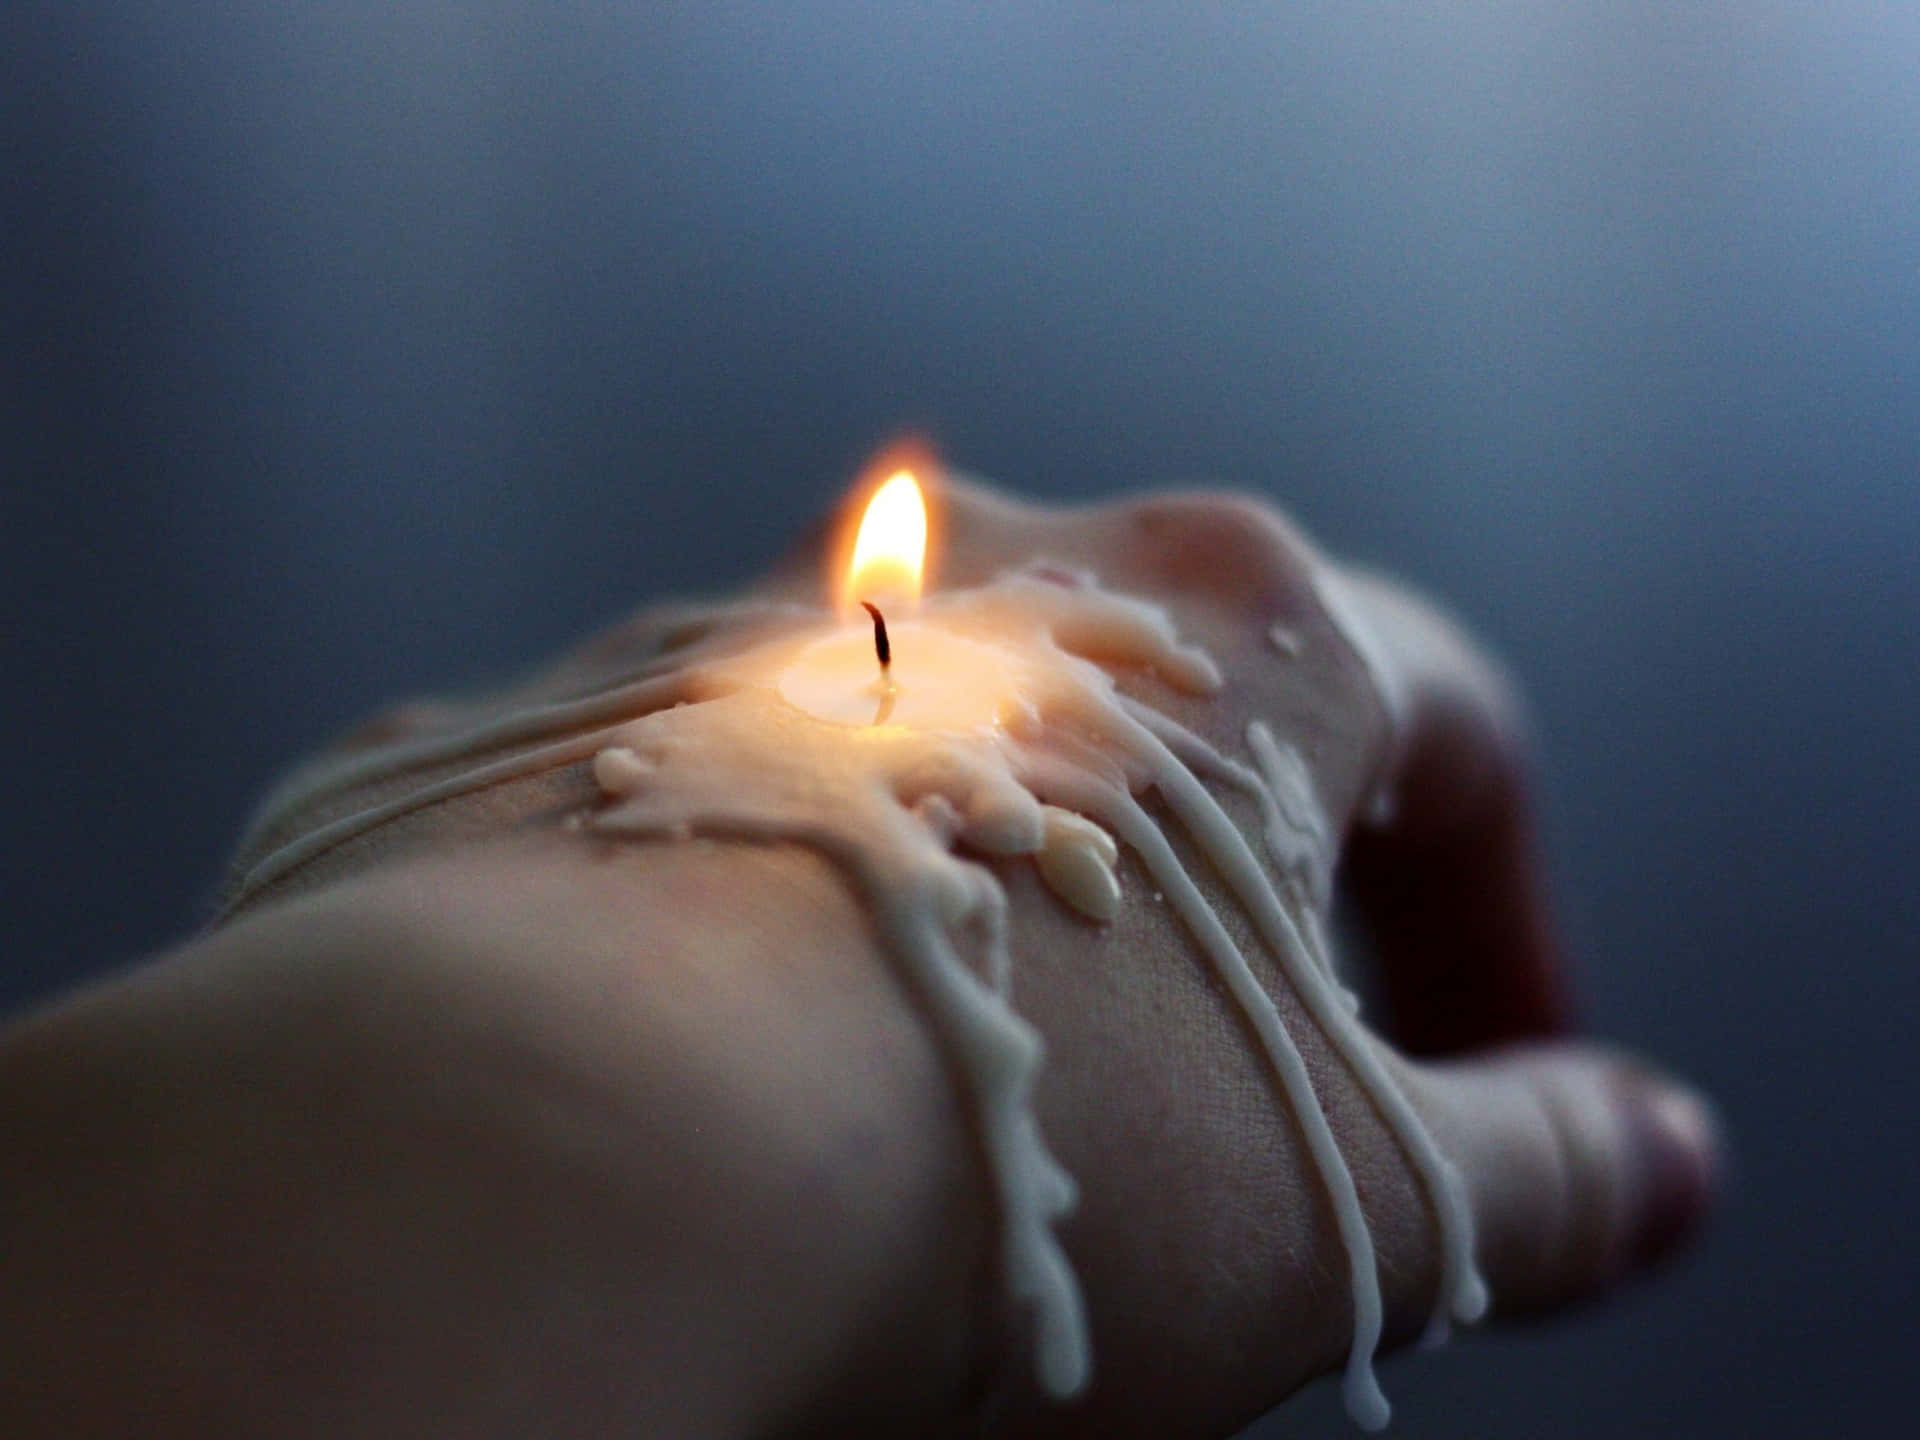 A Person's Hand With A Candle On It